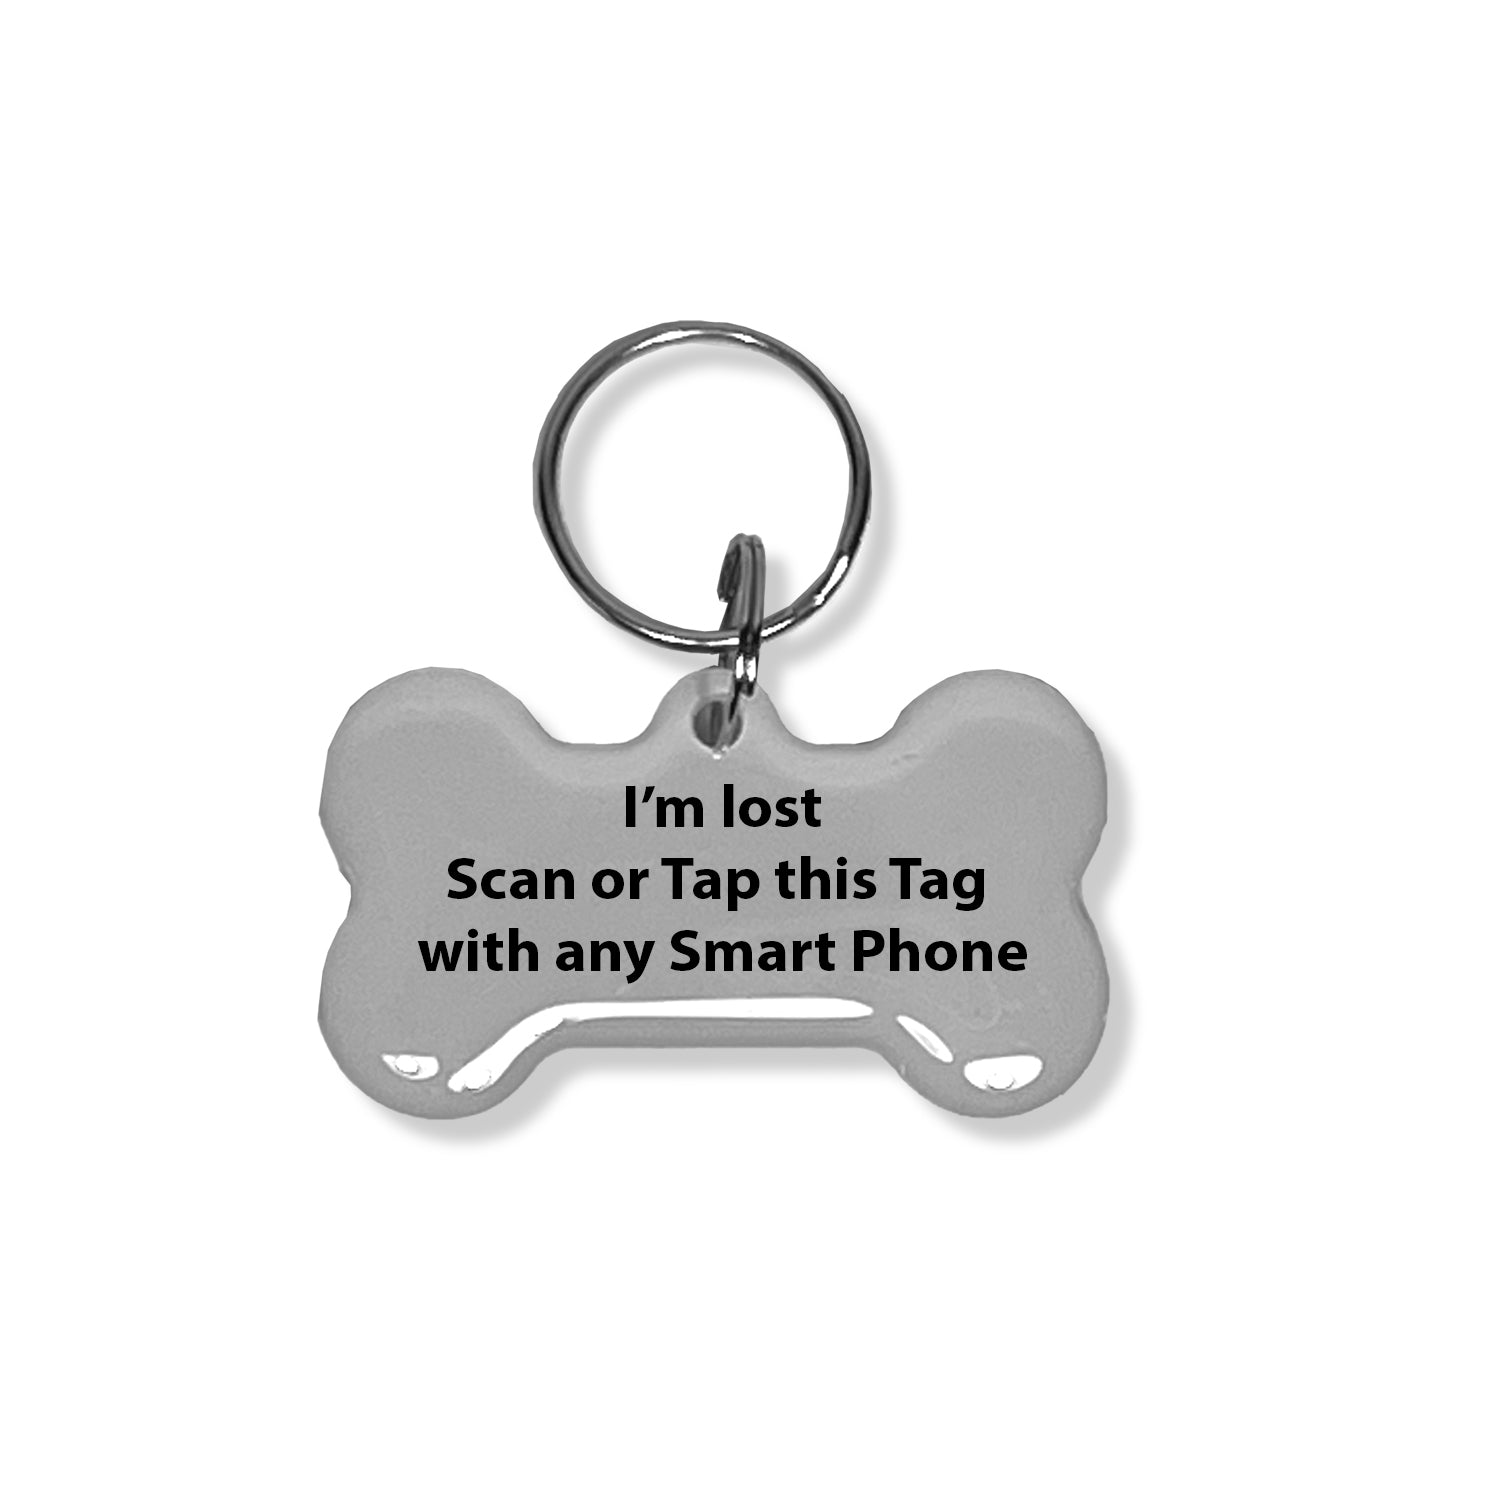 NFC Tag for pets